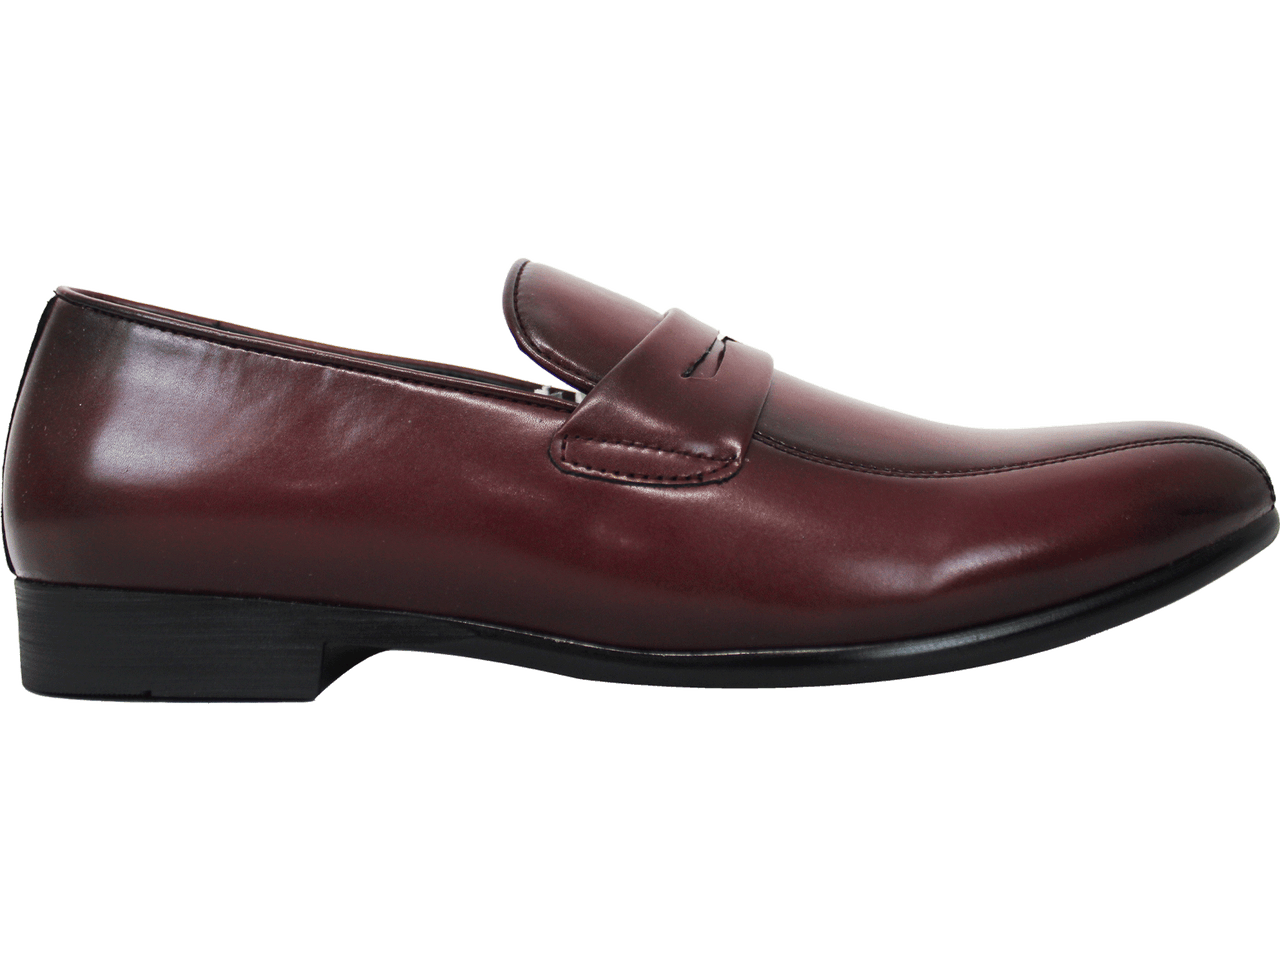 P CROUCH & CO Ox Blood Brown Slip On